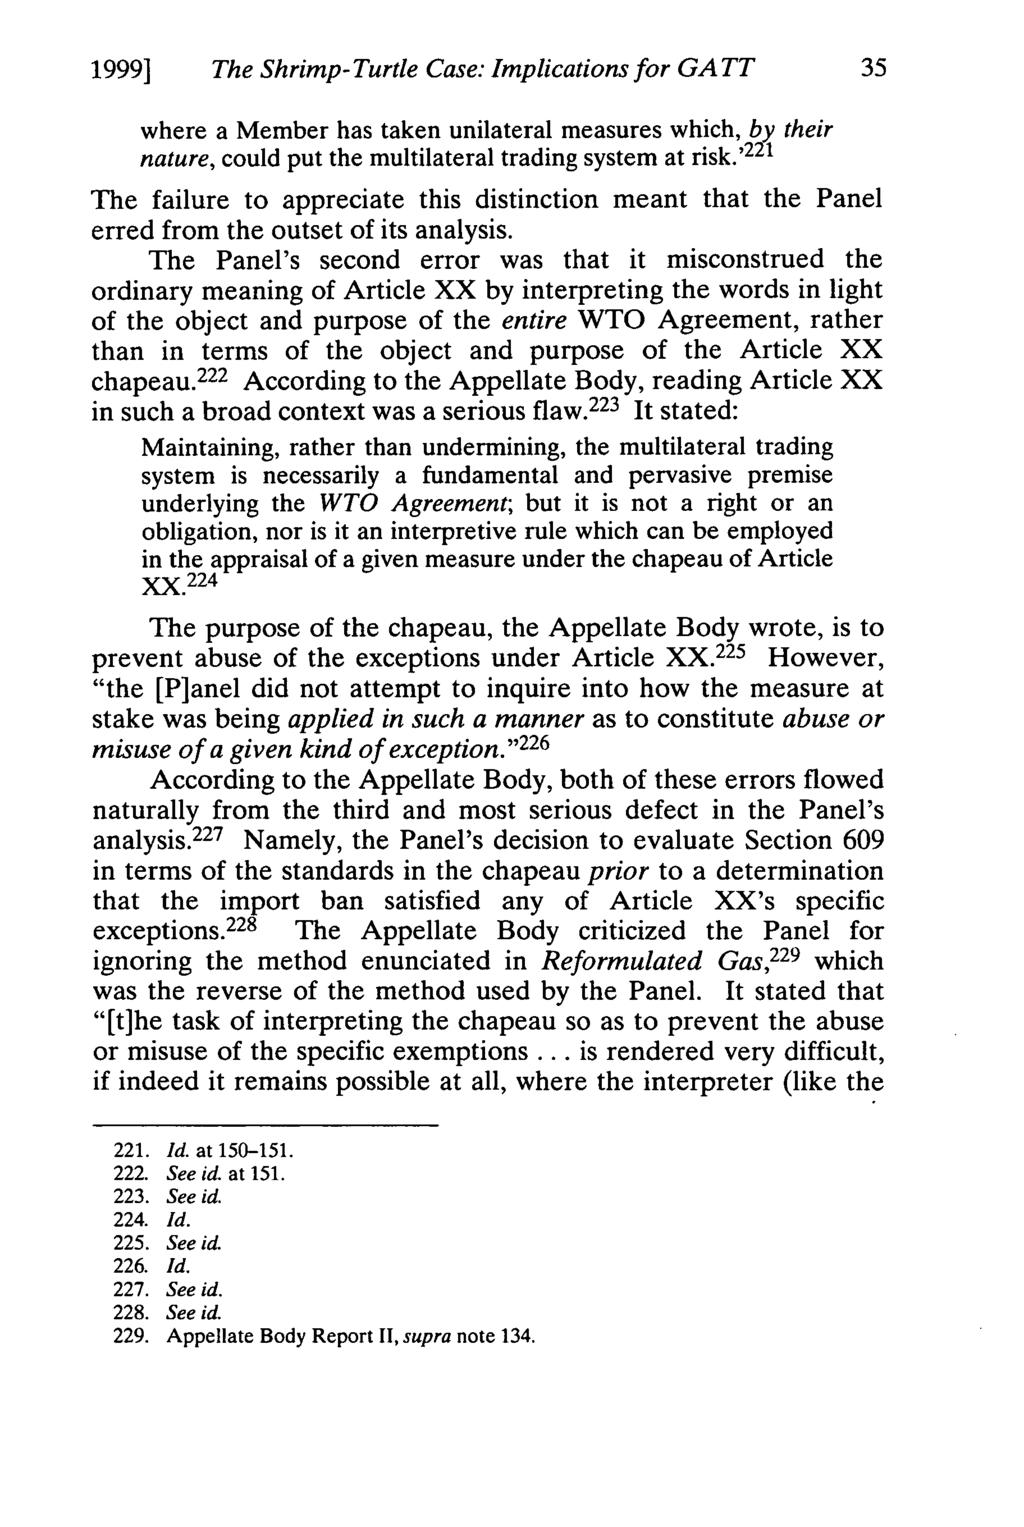 1999] The Shrimp-Turtle Case: Implications for GATT 35 where a Member has taken unilateral measures which, by their nature, could put the multilateral trading system at risk.